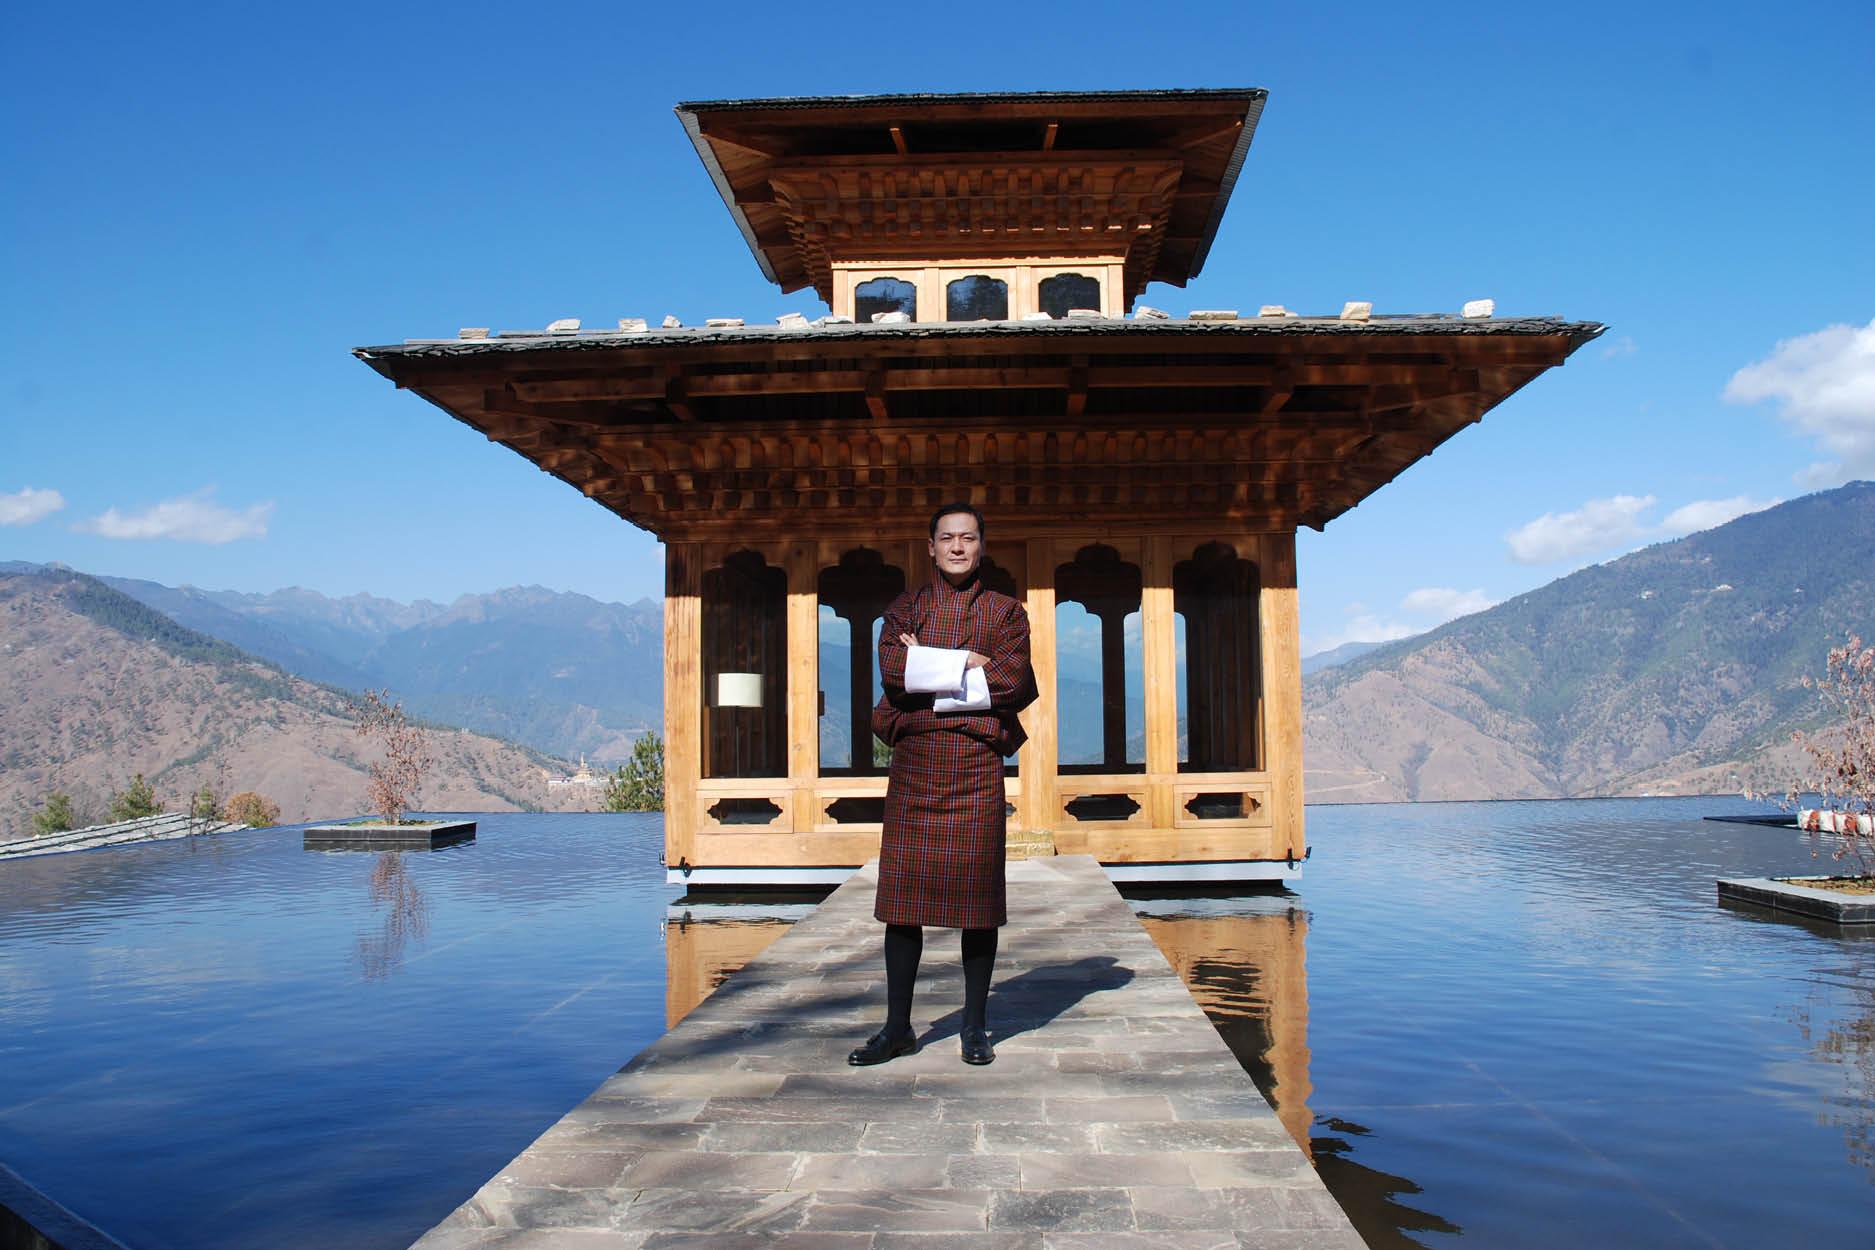 Dasho Sangay Wangchuk Takes Us on a Journey of Enlightenment